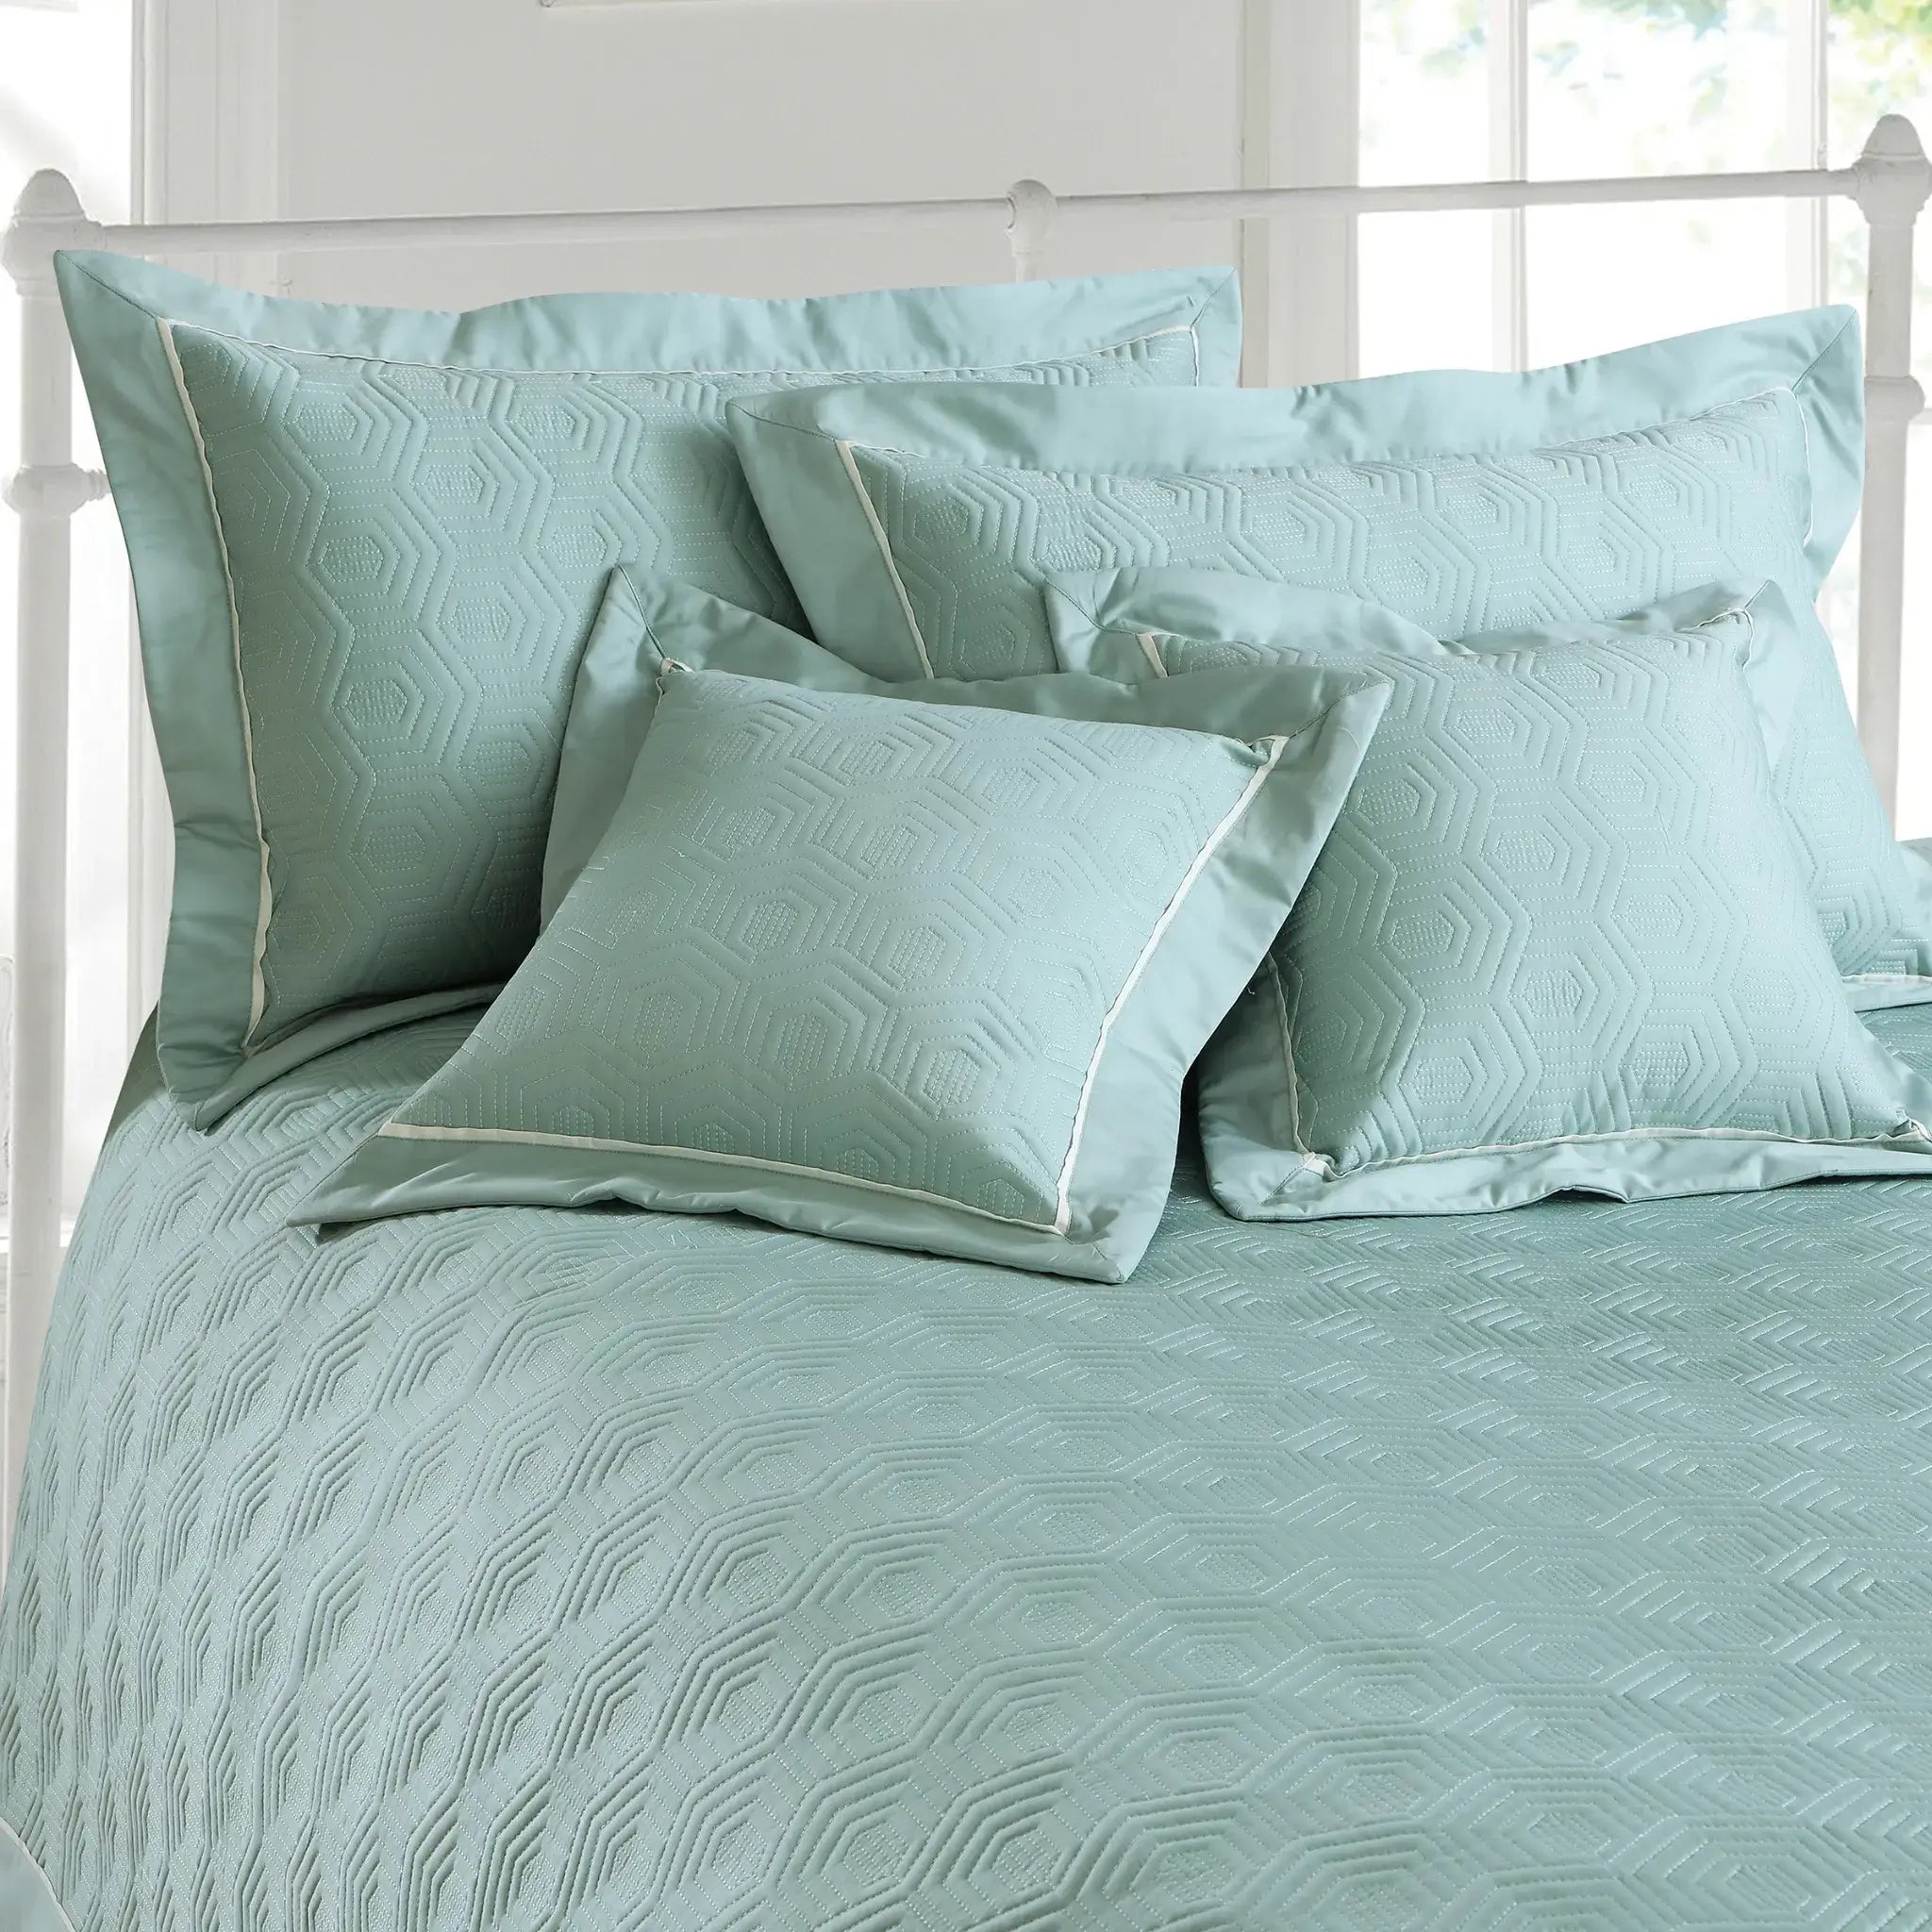 Malako Kairo 500 TC Paris Green Solid King Size 100% Cotton Quilted Bed Cover Set - MALAKO